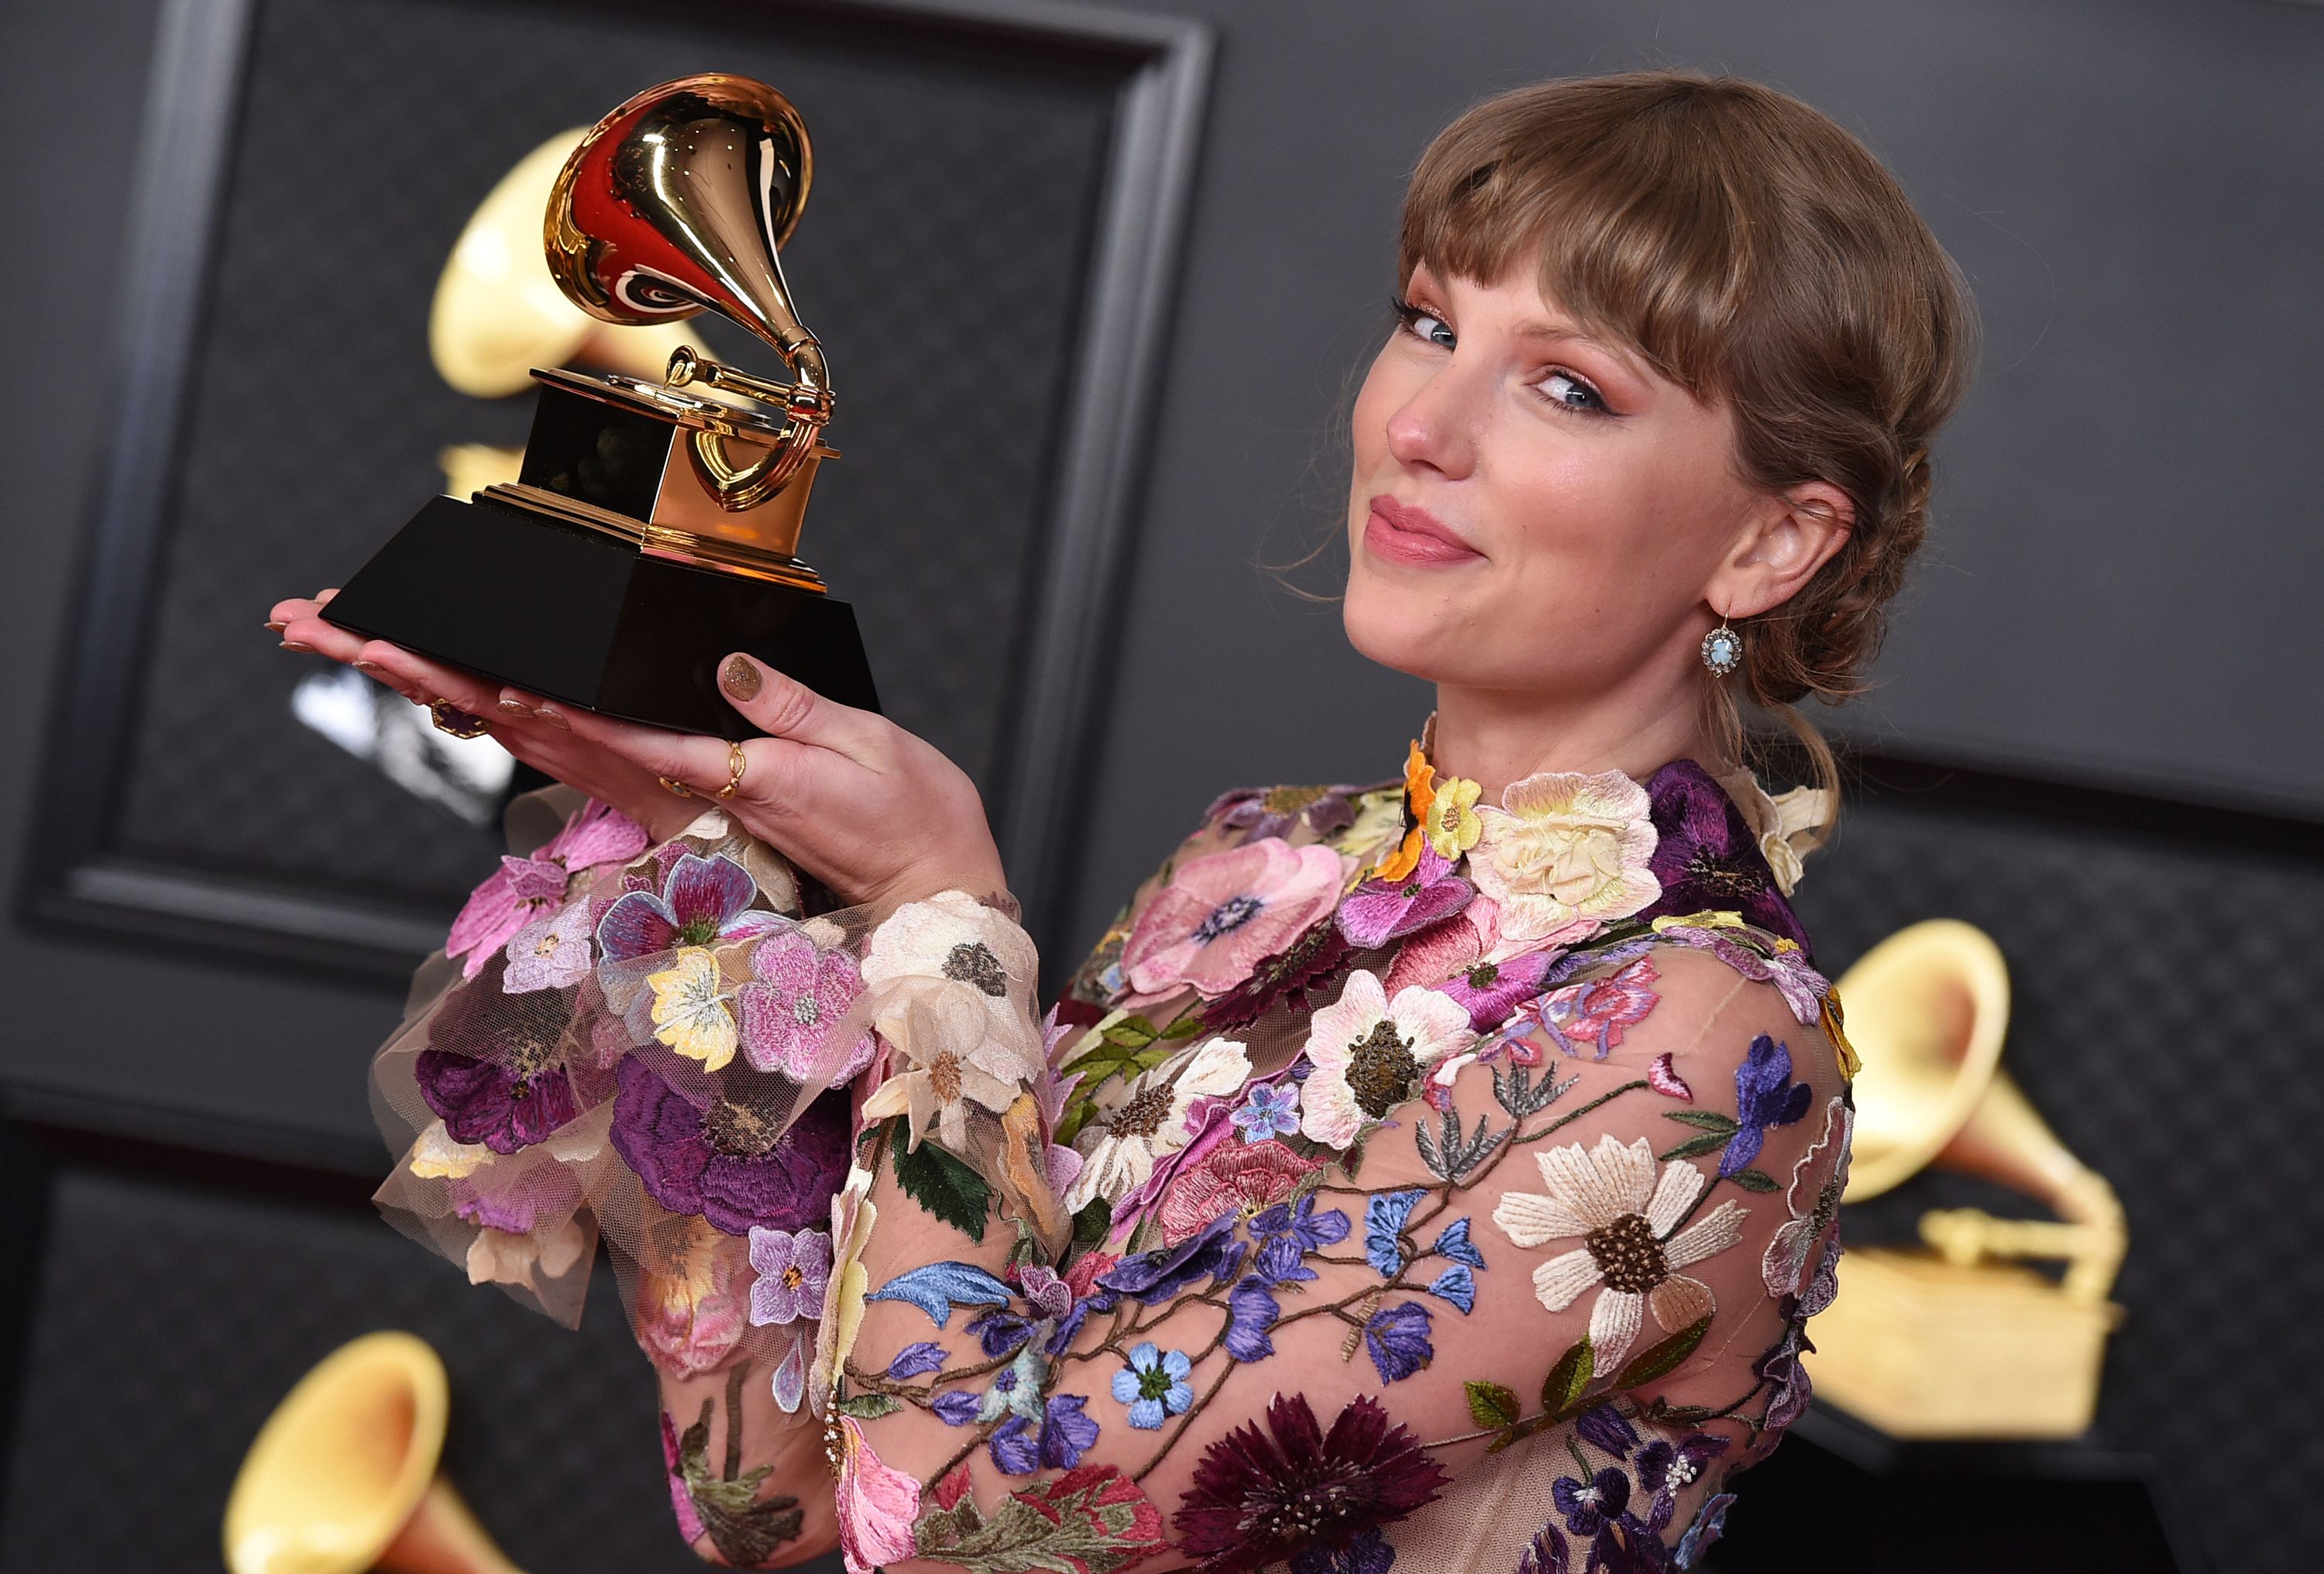 Grammy Awards 2023: Nominees, Date, Host, More